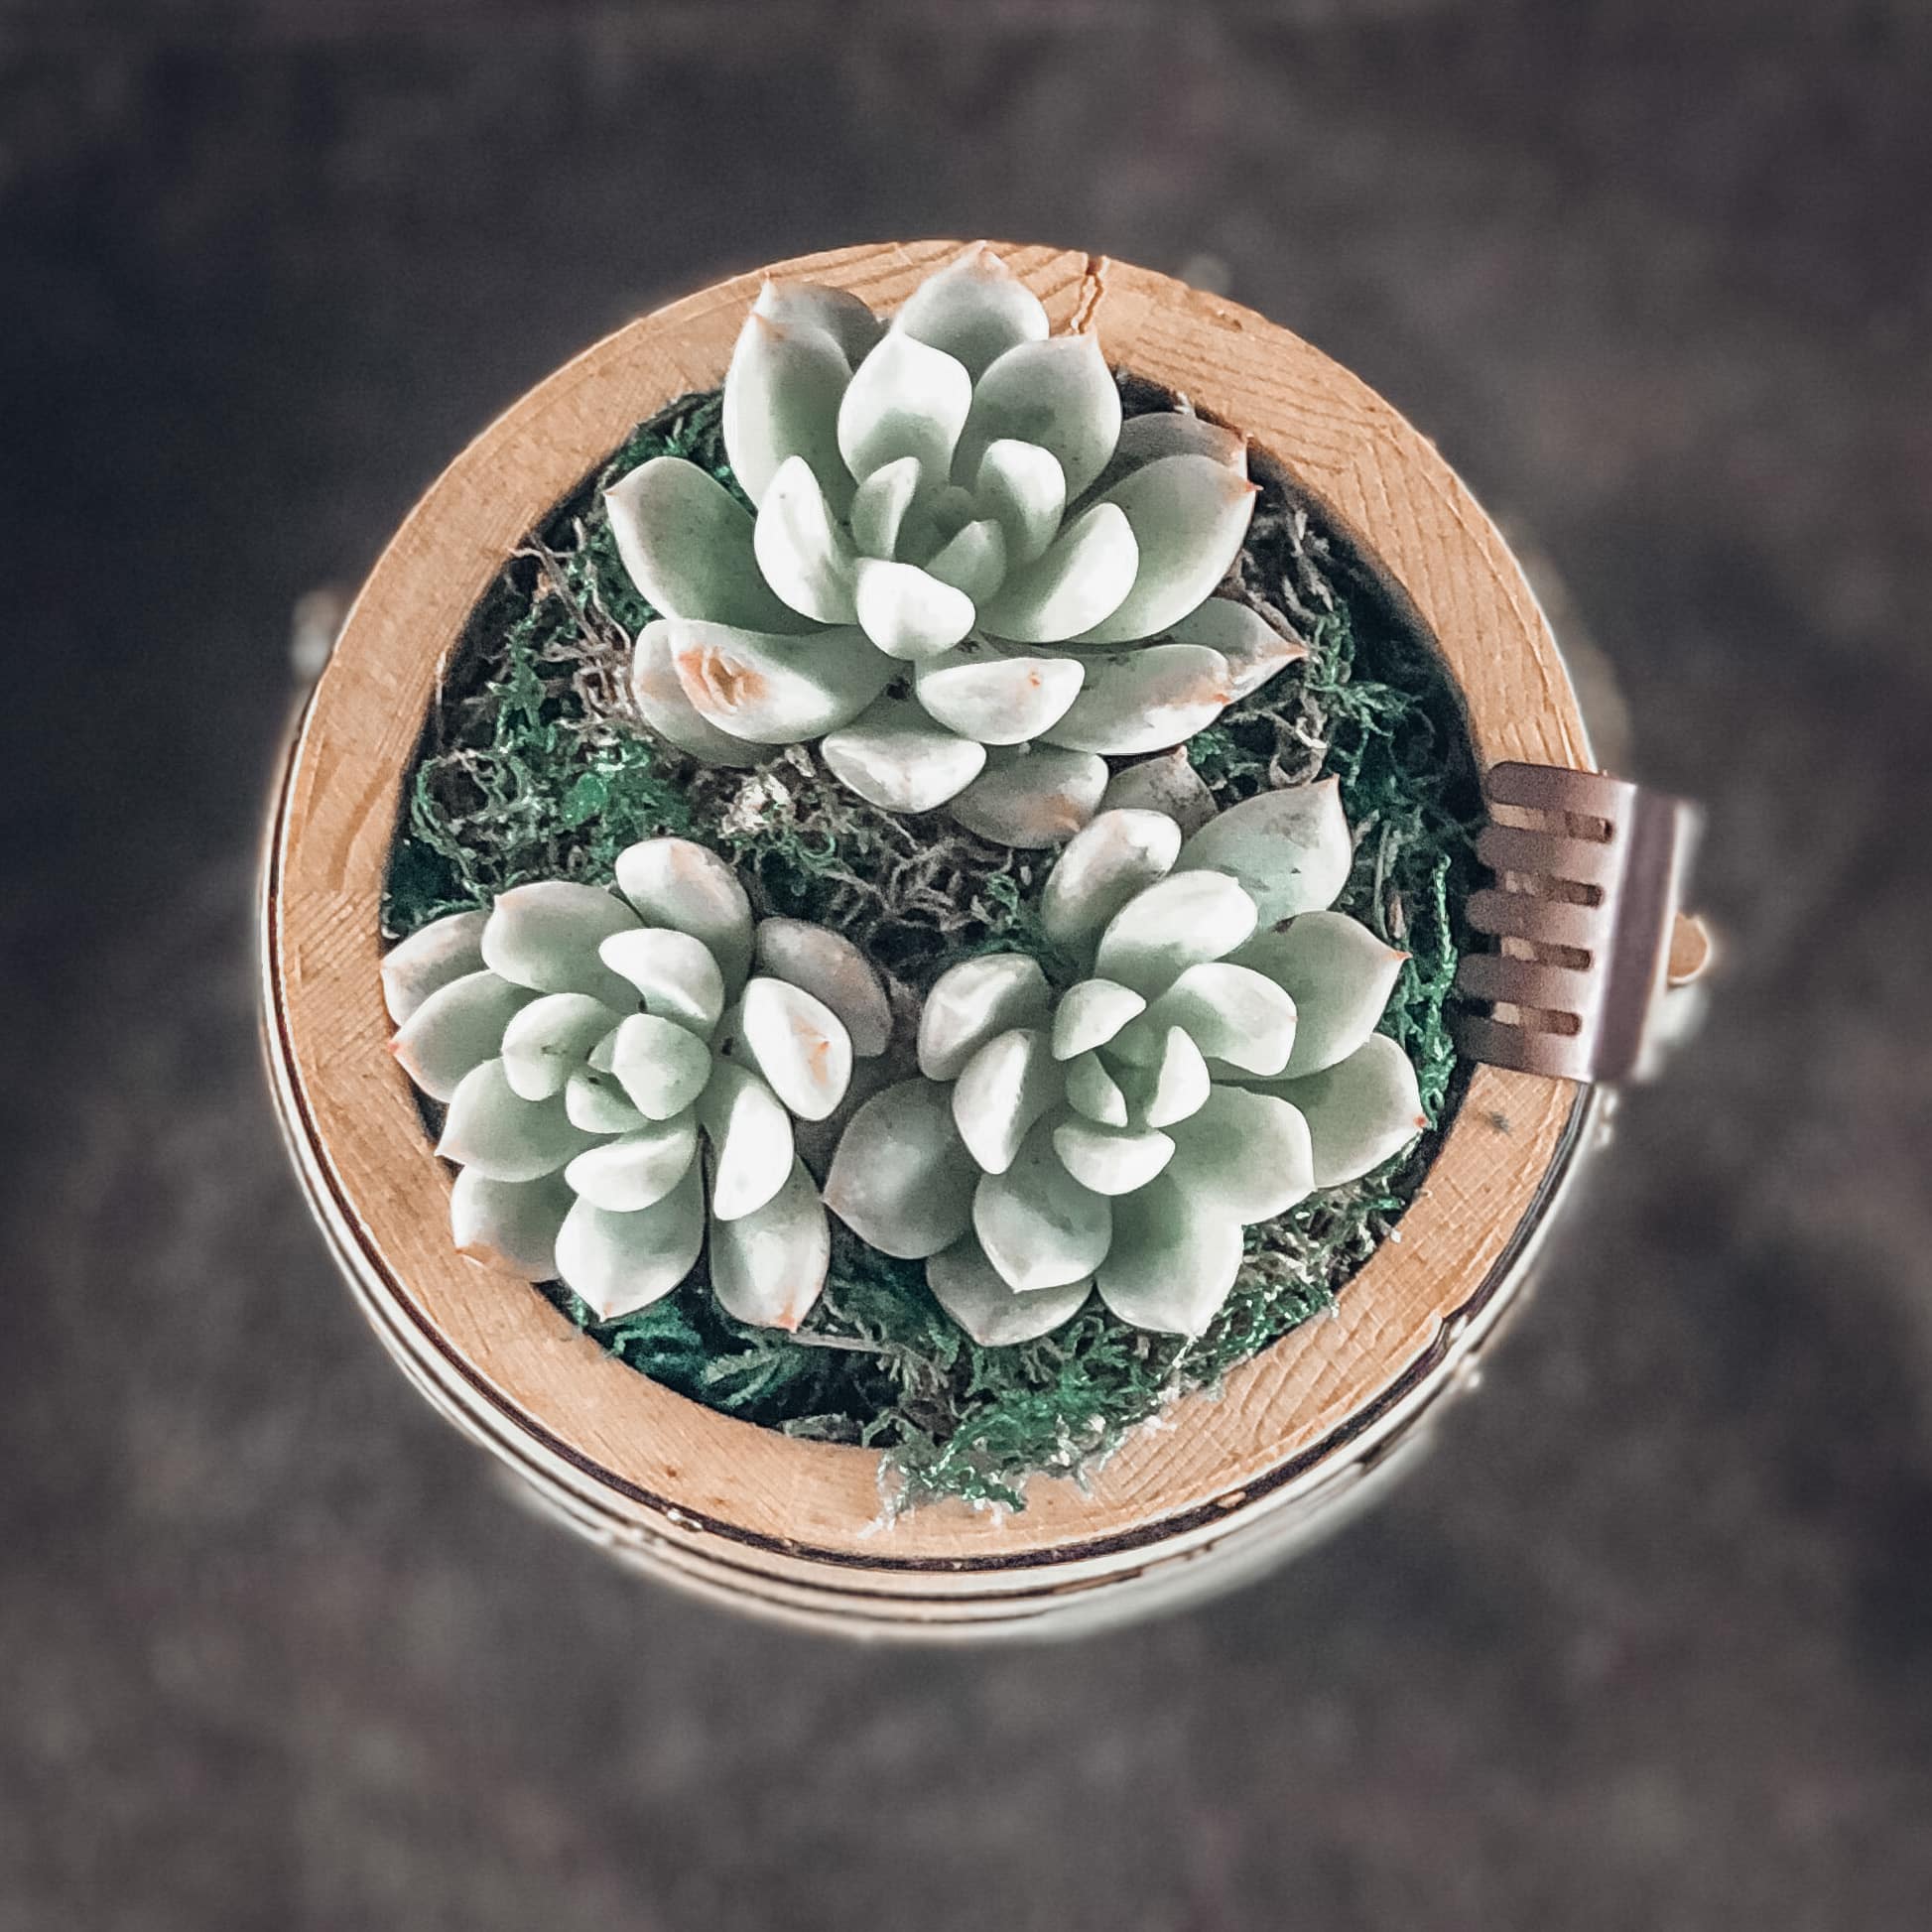 DIY Succulent Arrangements: Fun and Easy Ideas for Your Home